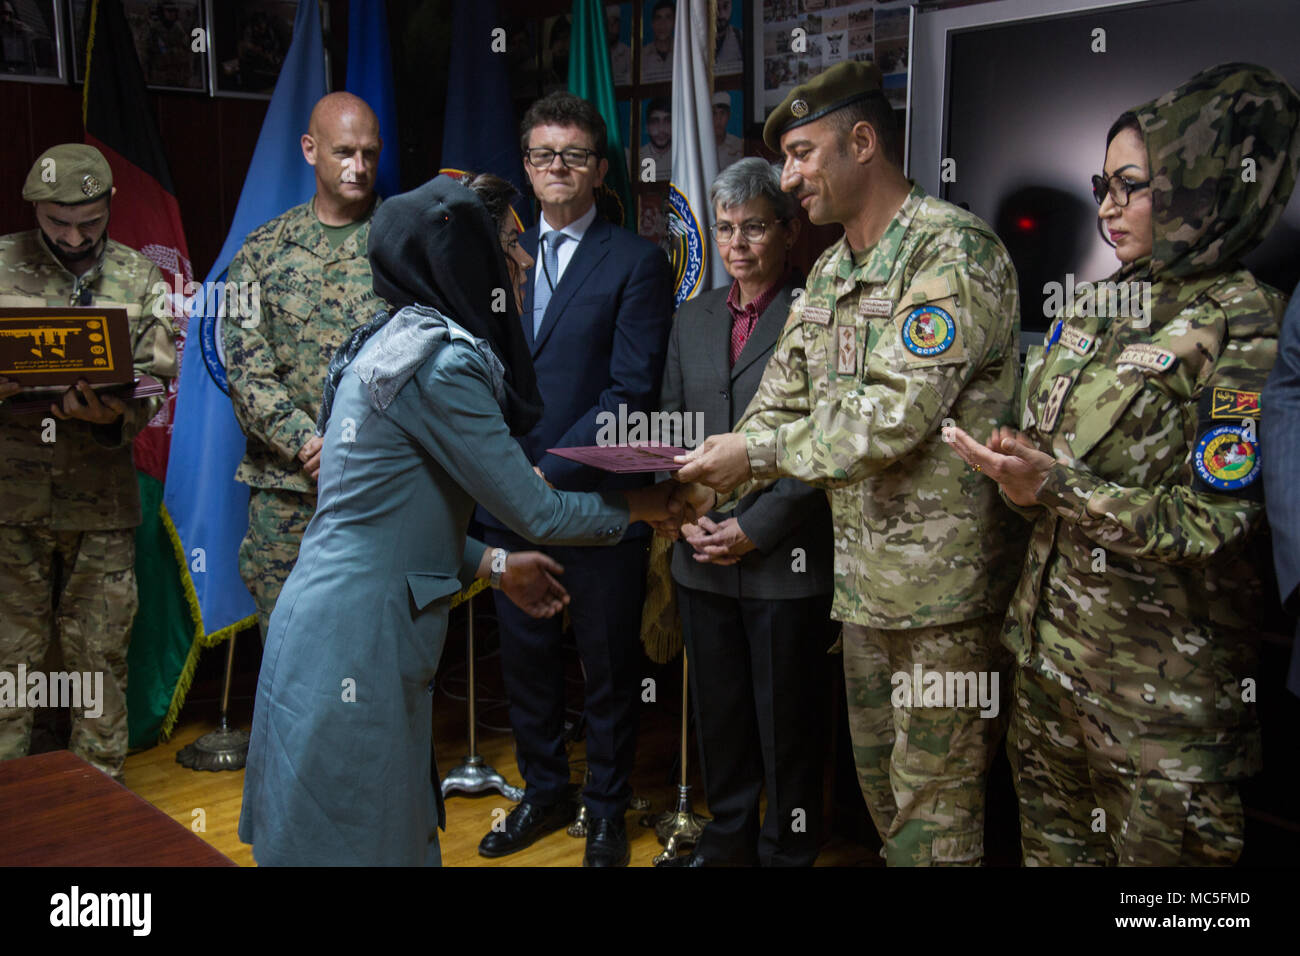 Afghan Lt. Col. M. Khetab Khangari, First General Command of Police Special Units commander, presents a certificate to a Female Foundation Course graduate as Australian Ambassador to Afghanistan Nicola Gordon-Smith and Norwegian Deputy Ambassador to Afghanistan John Almster look on at the Special Police Training Center, Camp Wak, Kabul, Afghanistan, Apr. 5, 2018. (U.S. Army photo by Austin T. Boucher) Stock Photo